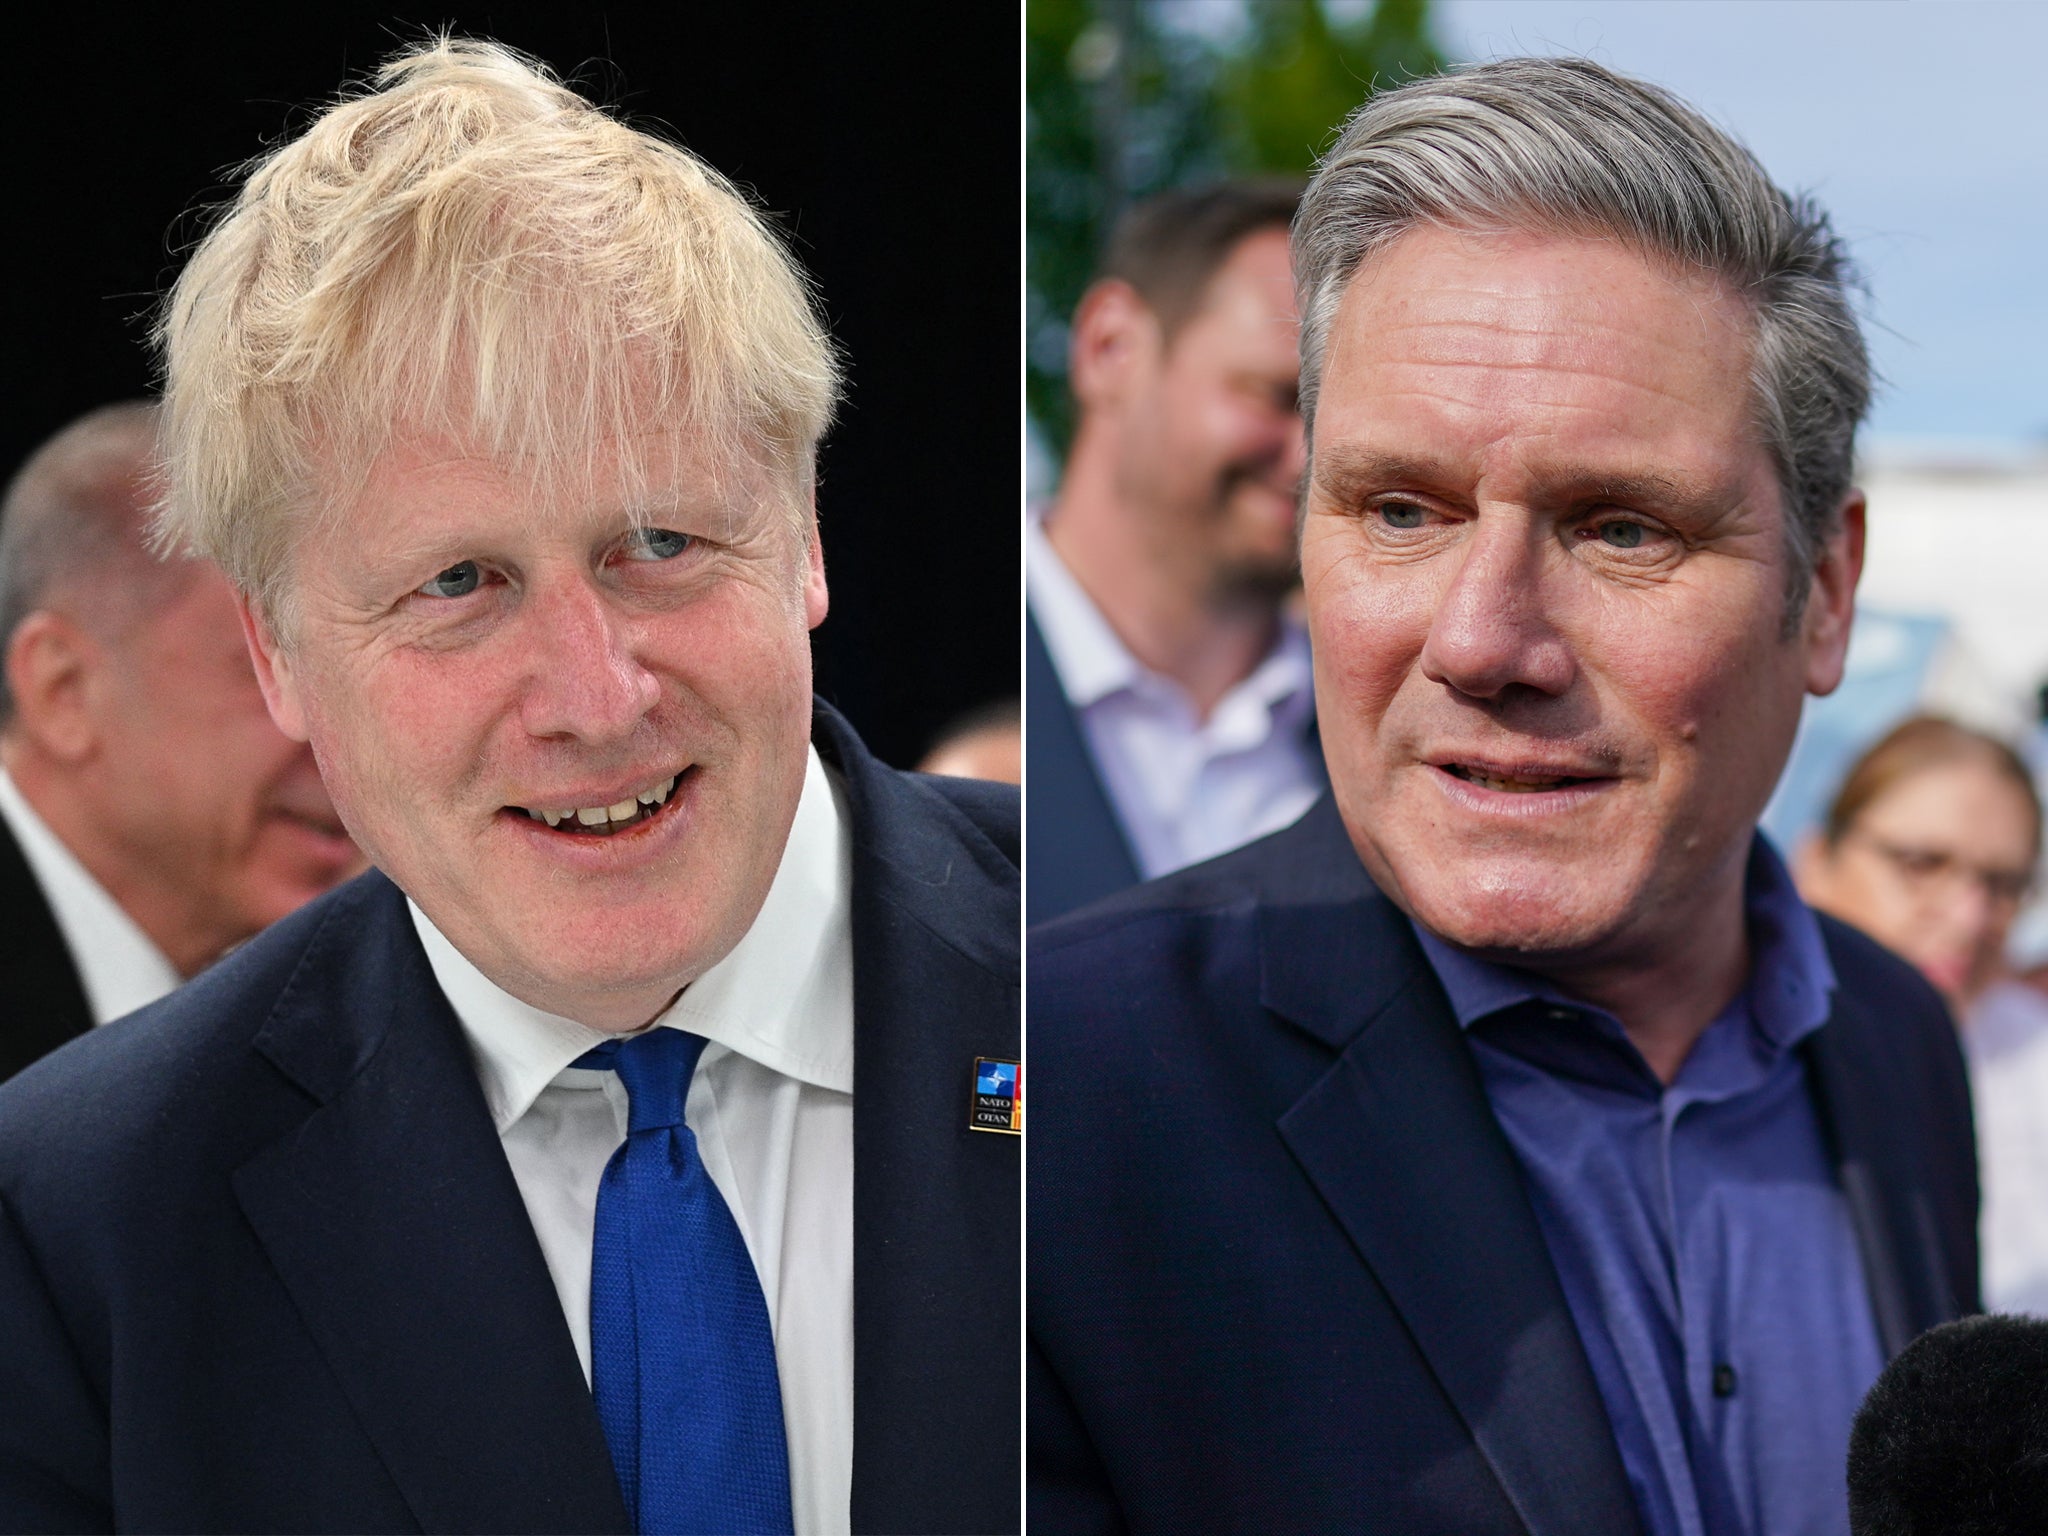 The crowning of a new Tory leader will inevitably make Starmer look less new